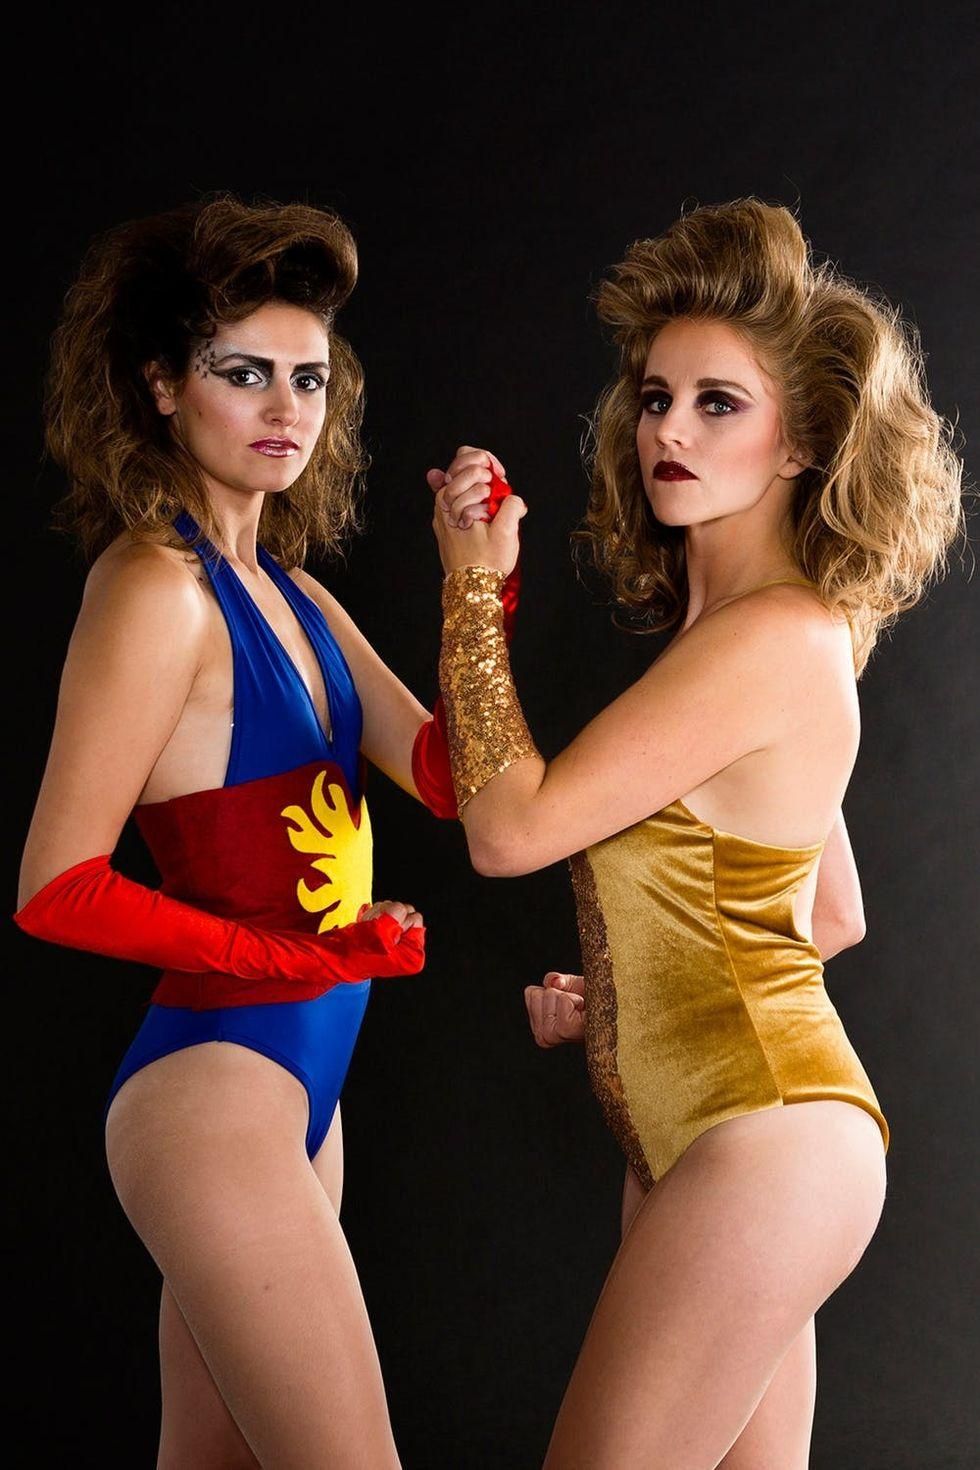 Zoya the Destroya and Liberty Belle from GLOW